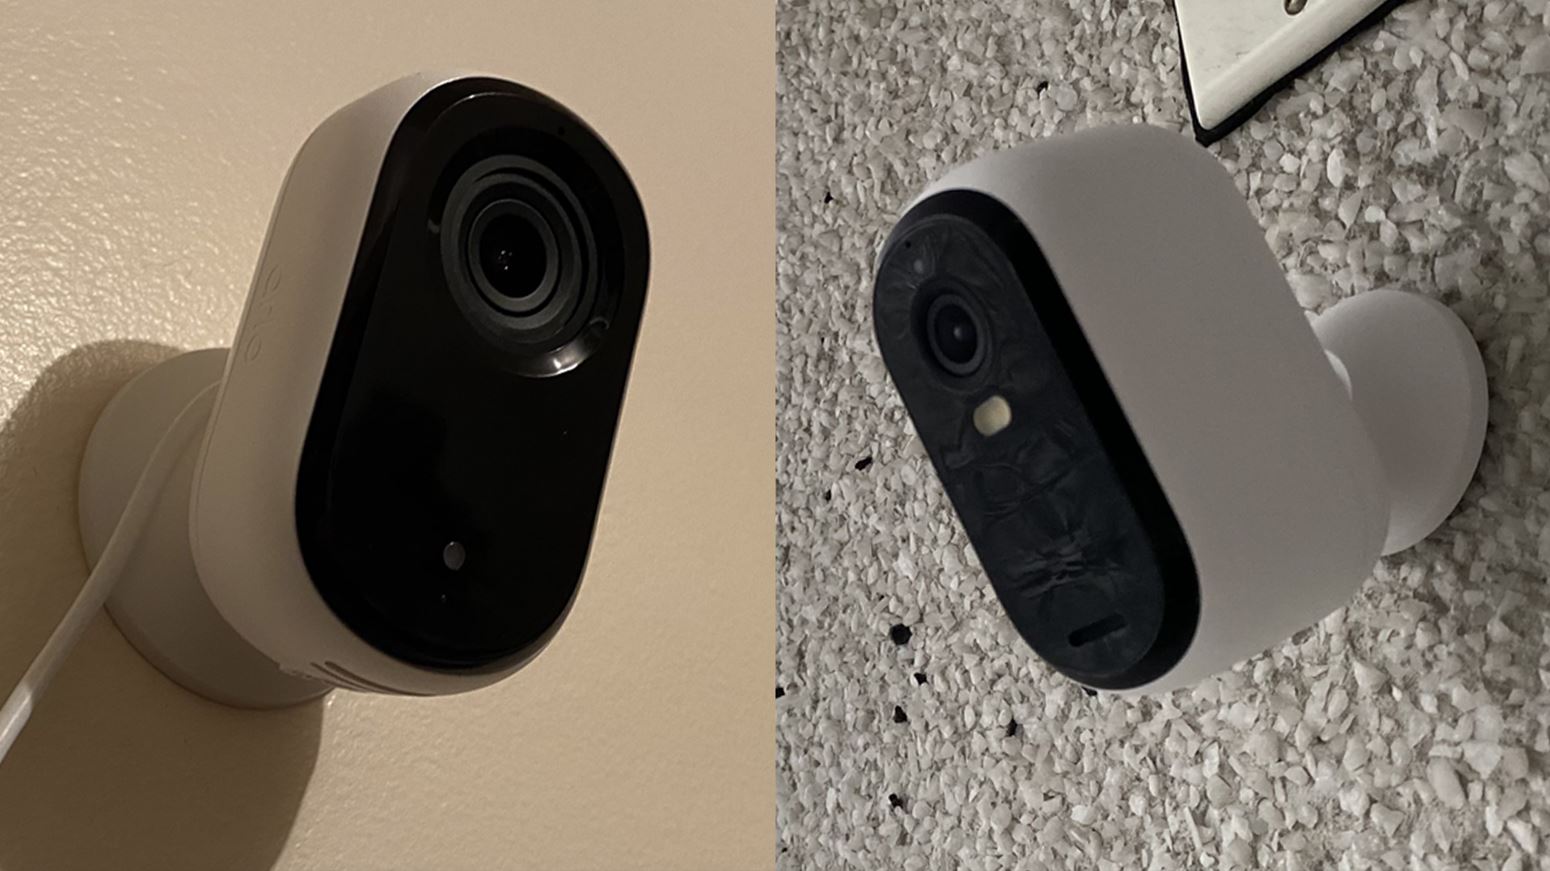 Comparing the two Arlo Essential smart security cameras side by side